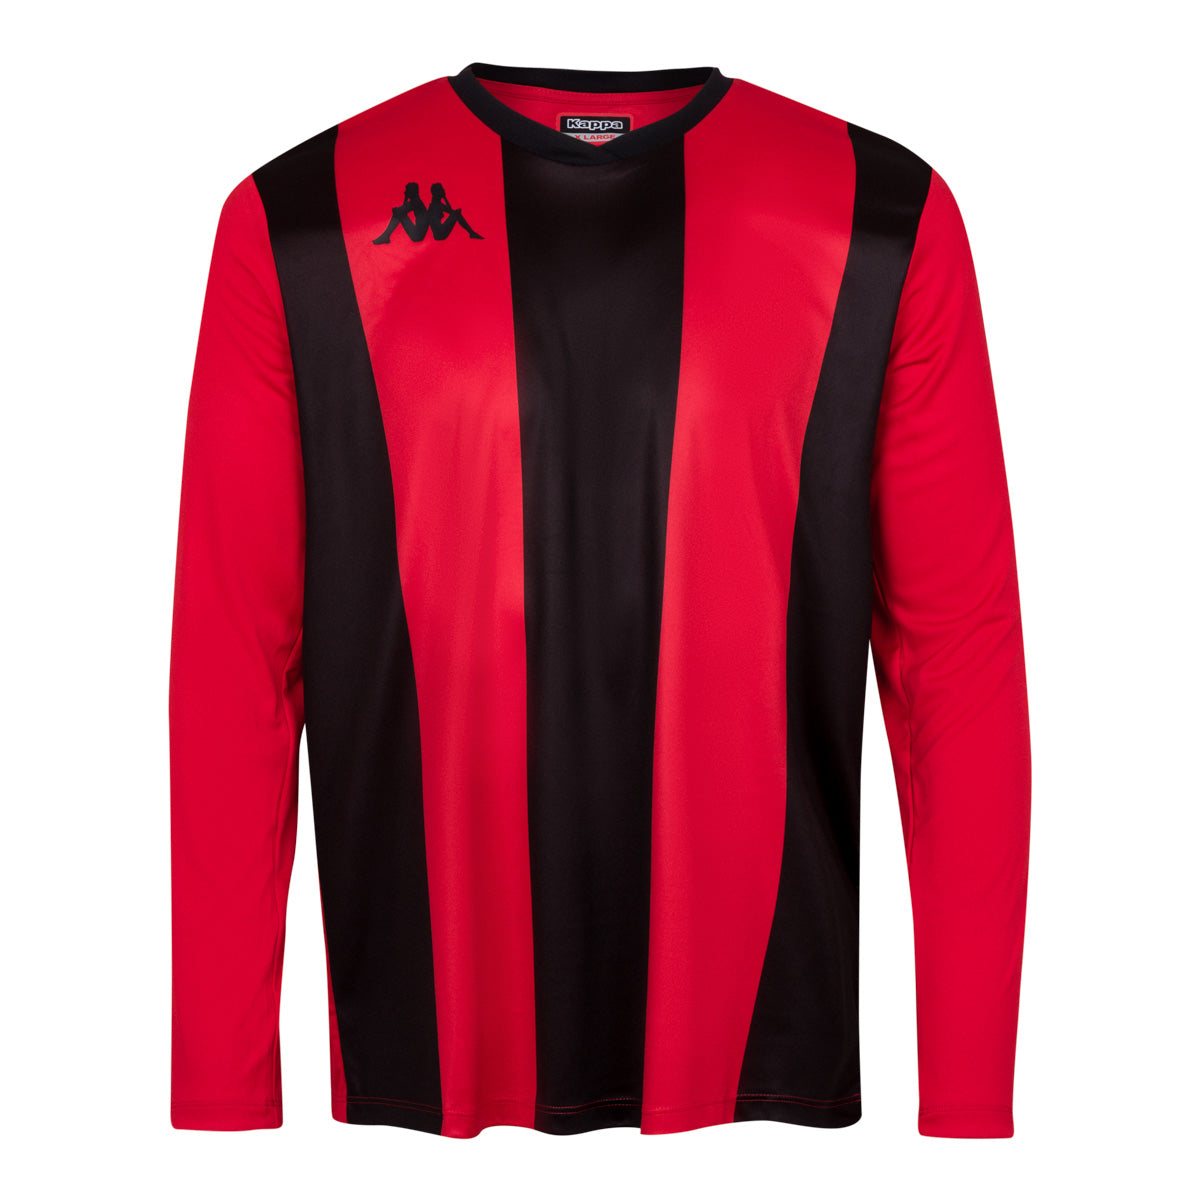 Maillot Football Caserne Rouge Homme - Image 1